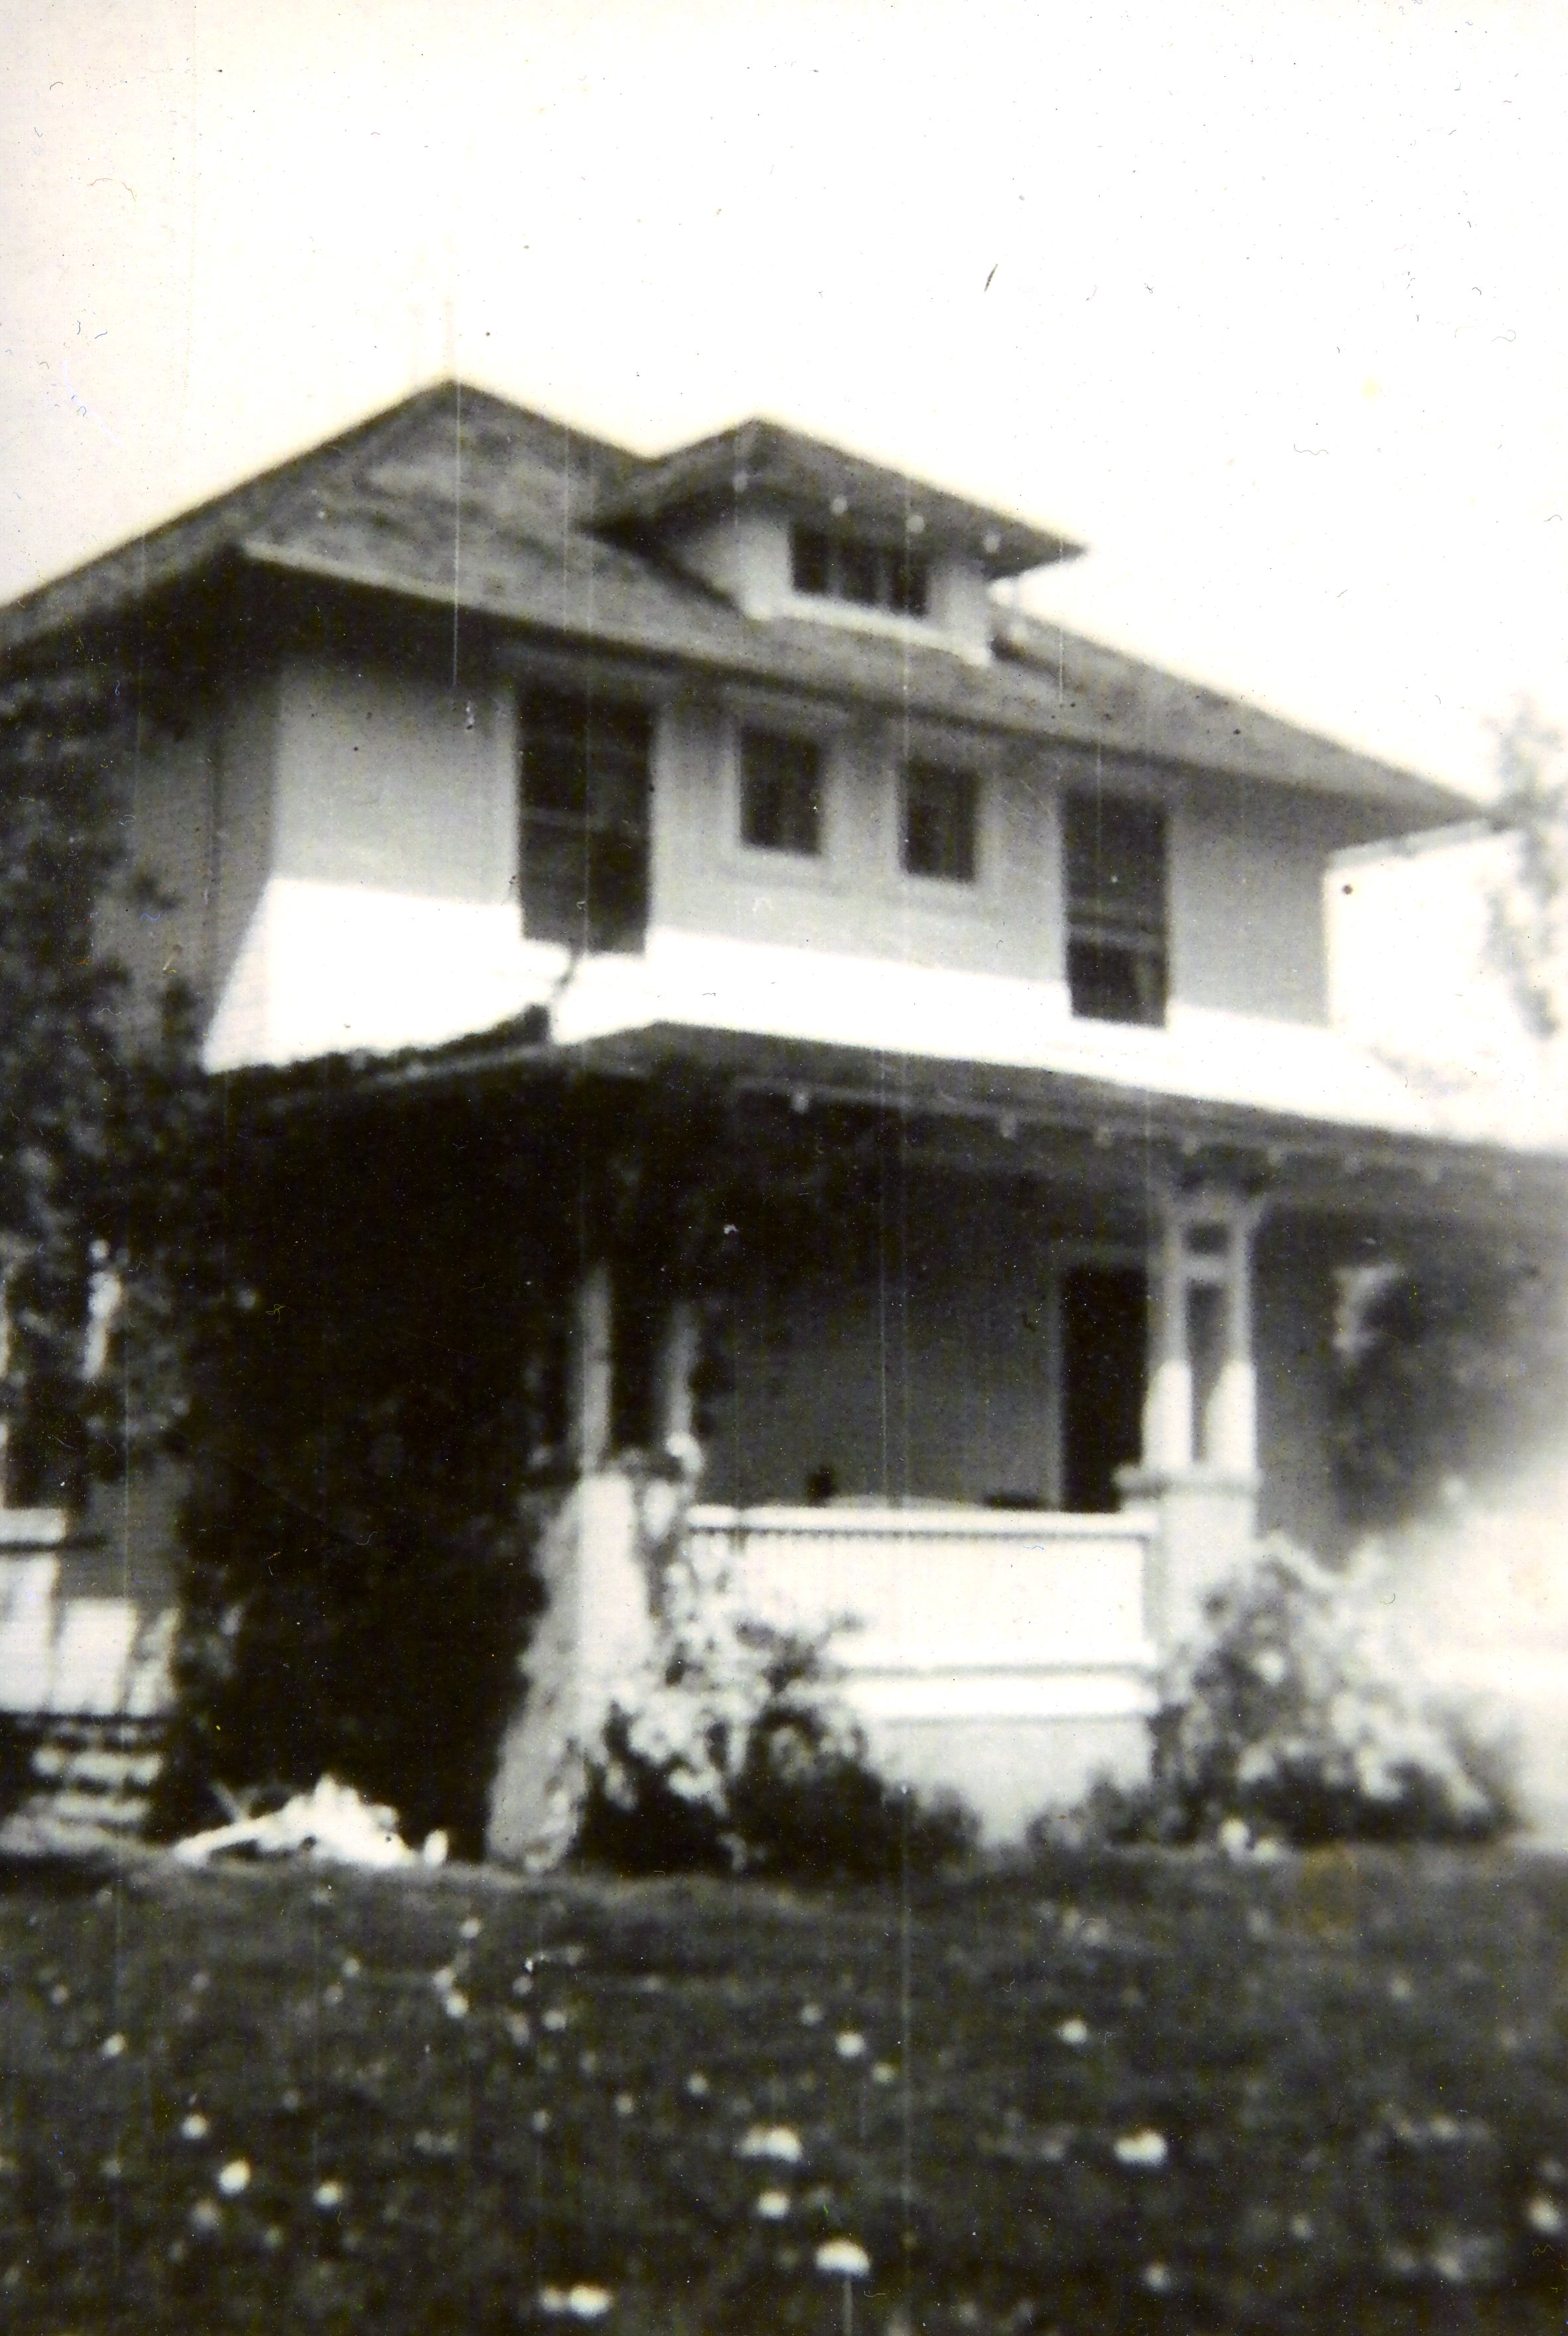 Historic photo showing the residence of Milo and Clara Mortensen built in 1915.